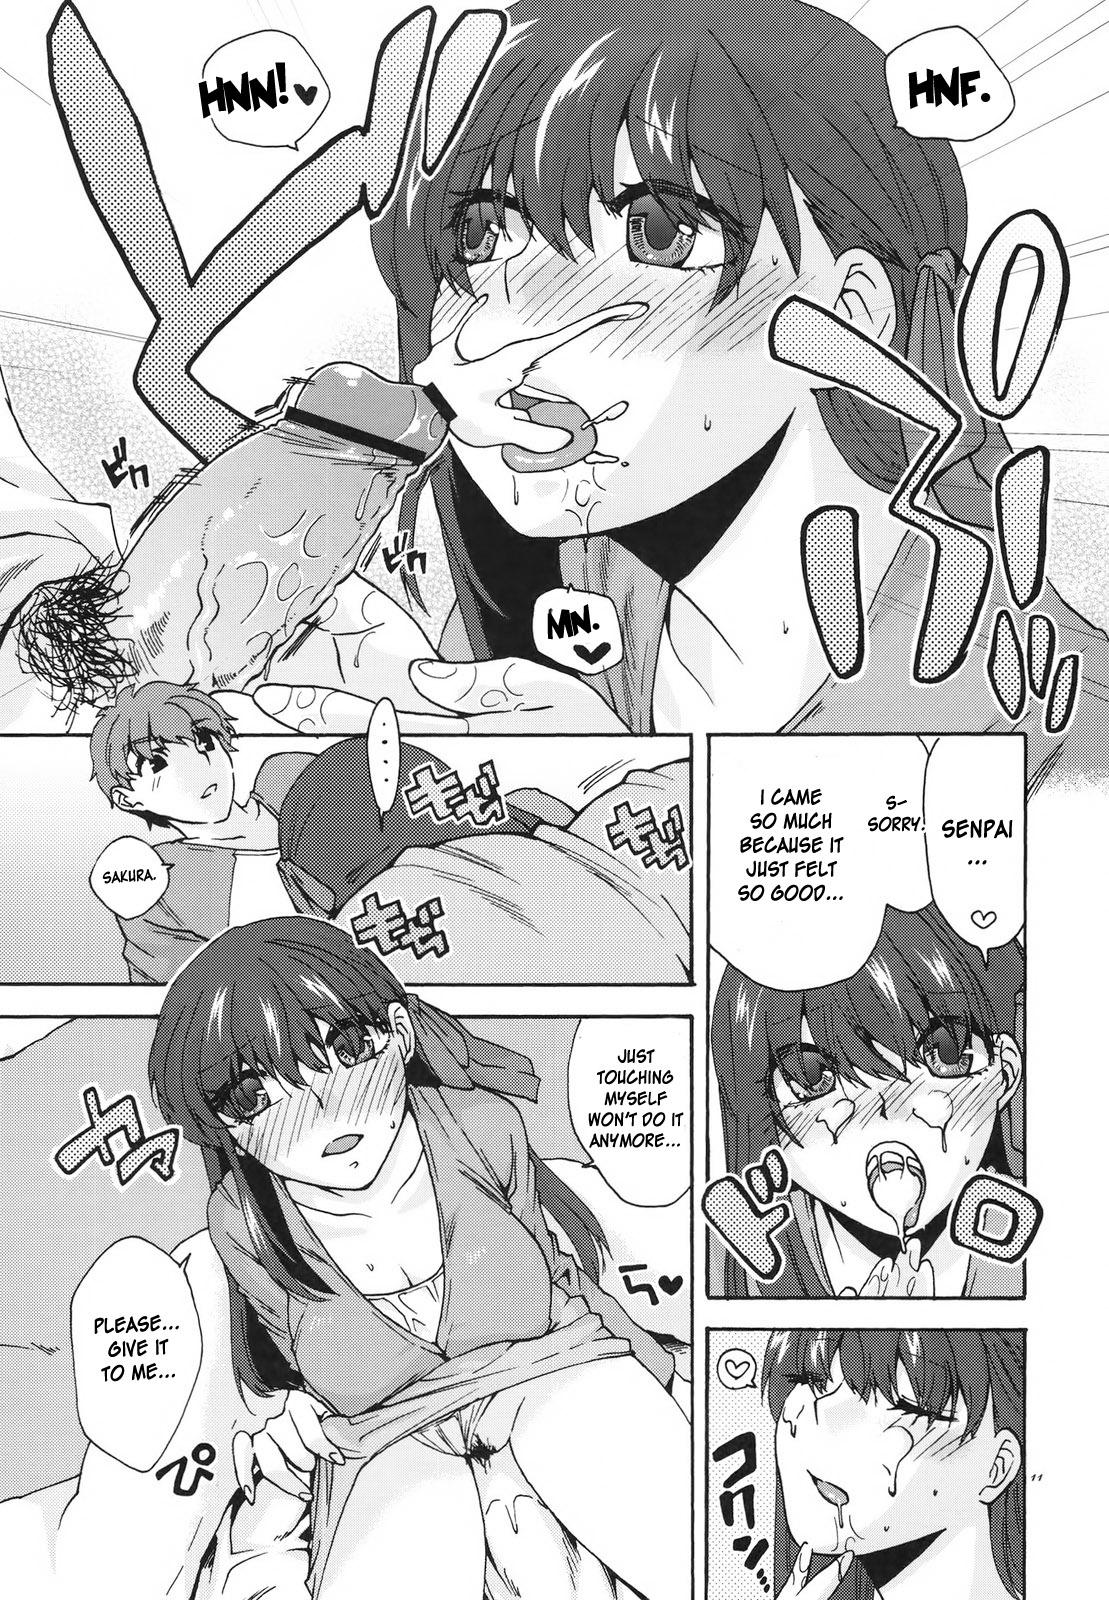 Tesao Crime and Affection - Fate stay night Mum - Page 11